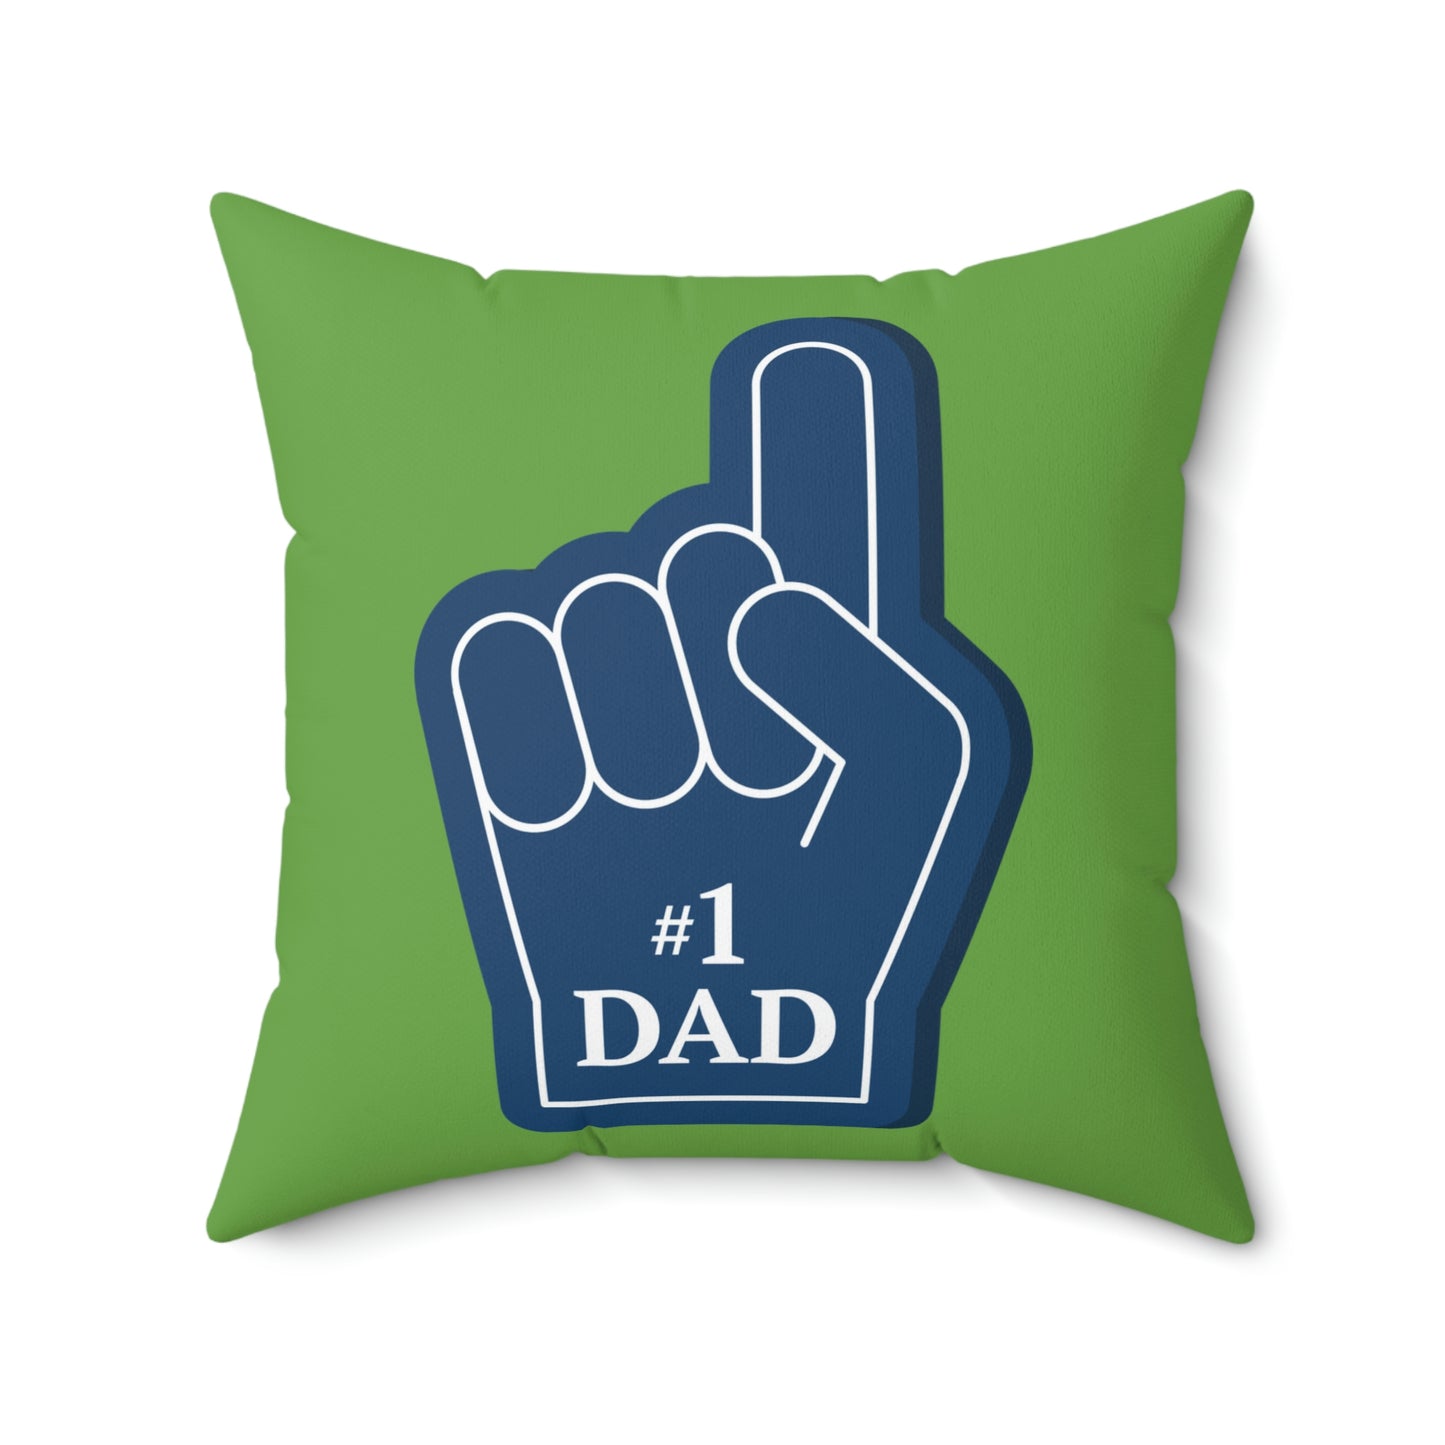 Spun Polyester Square Pillow Case "Number One Dad on Green”